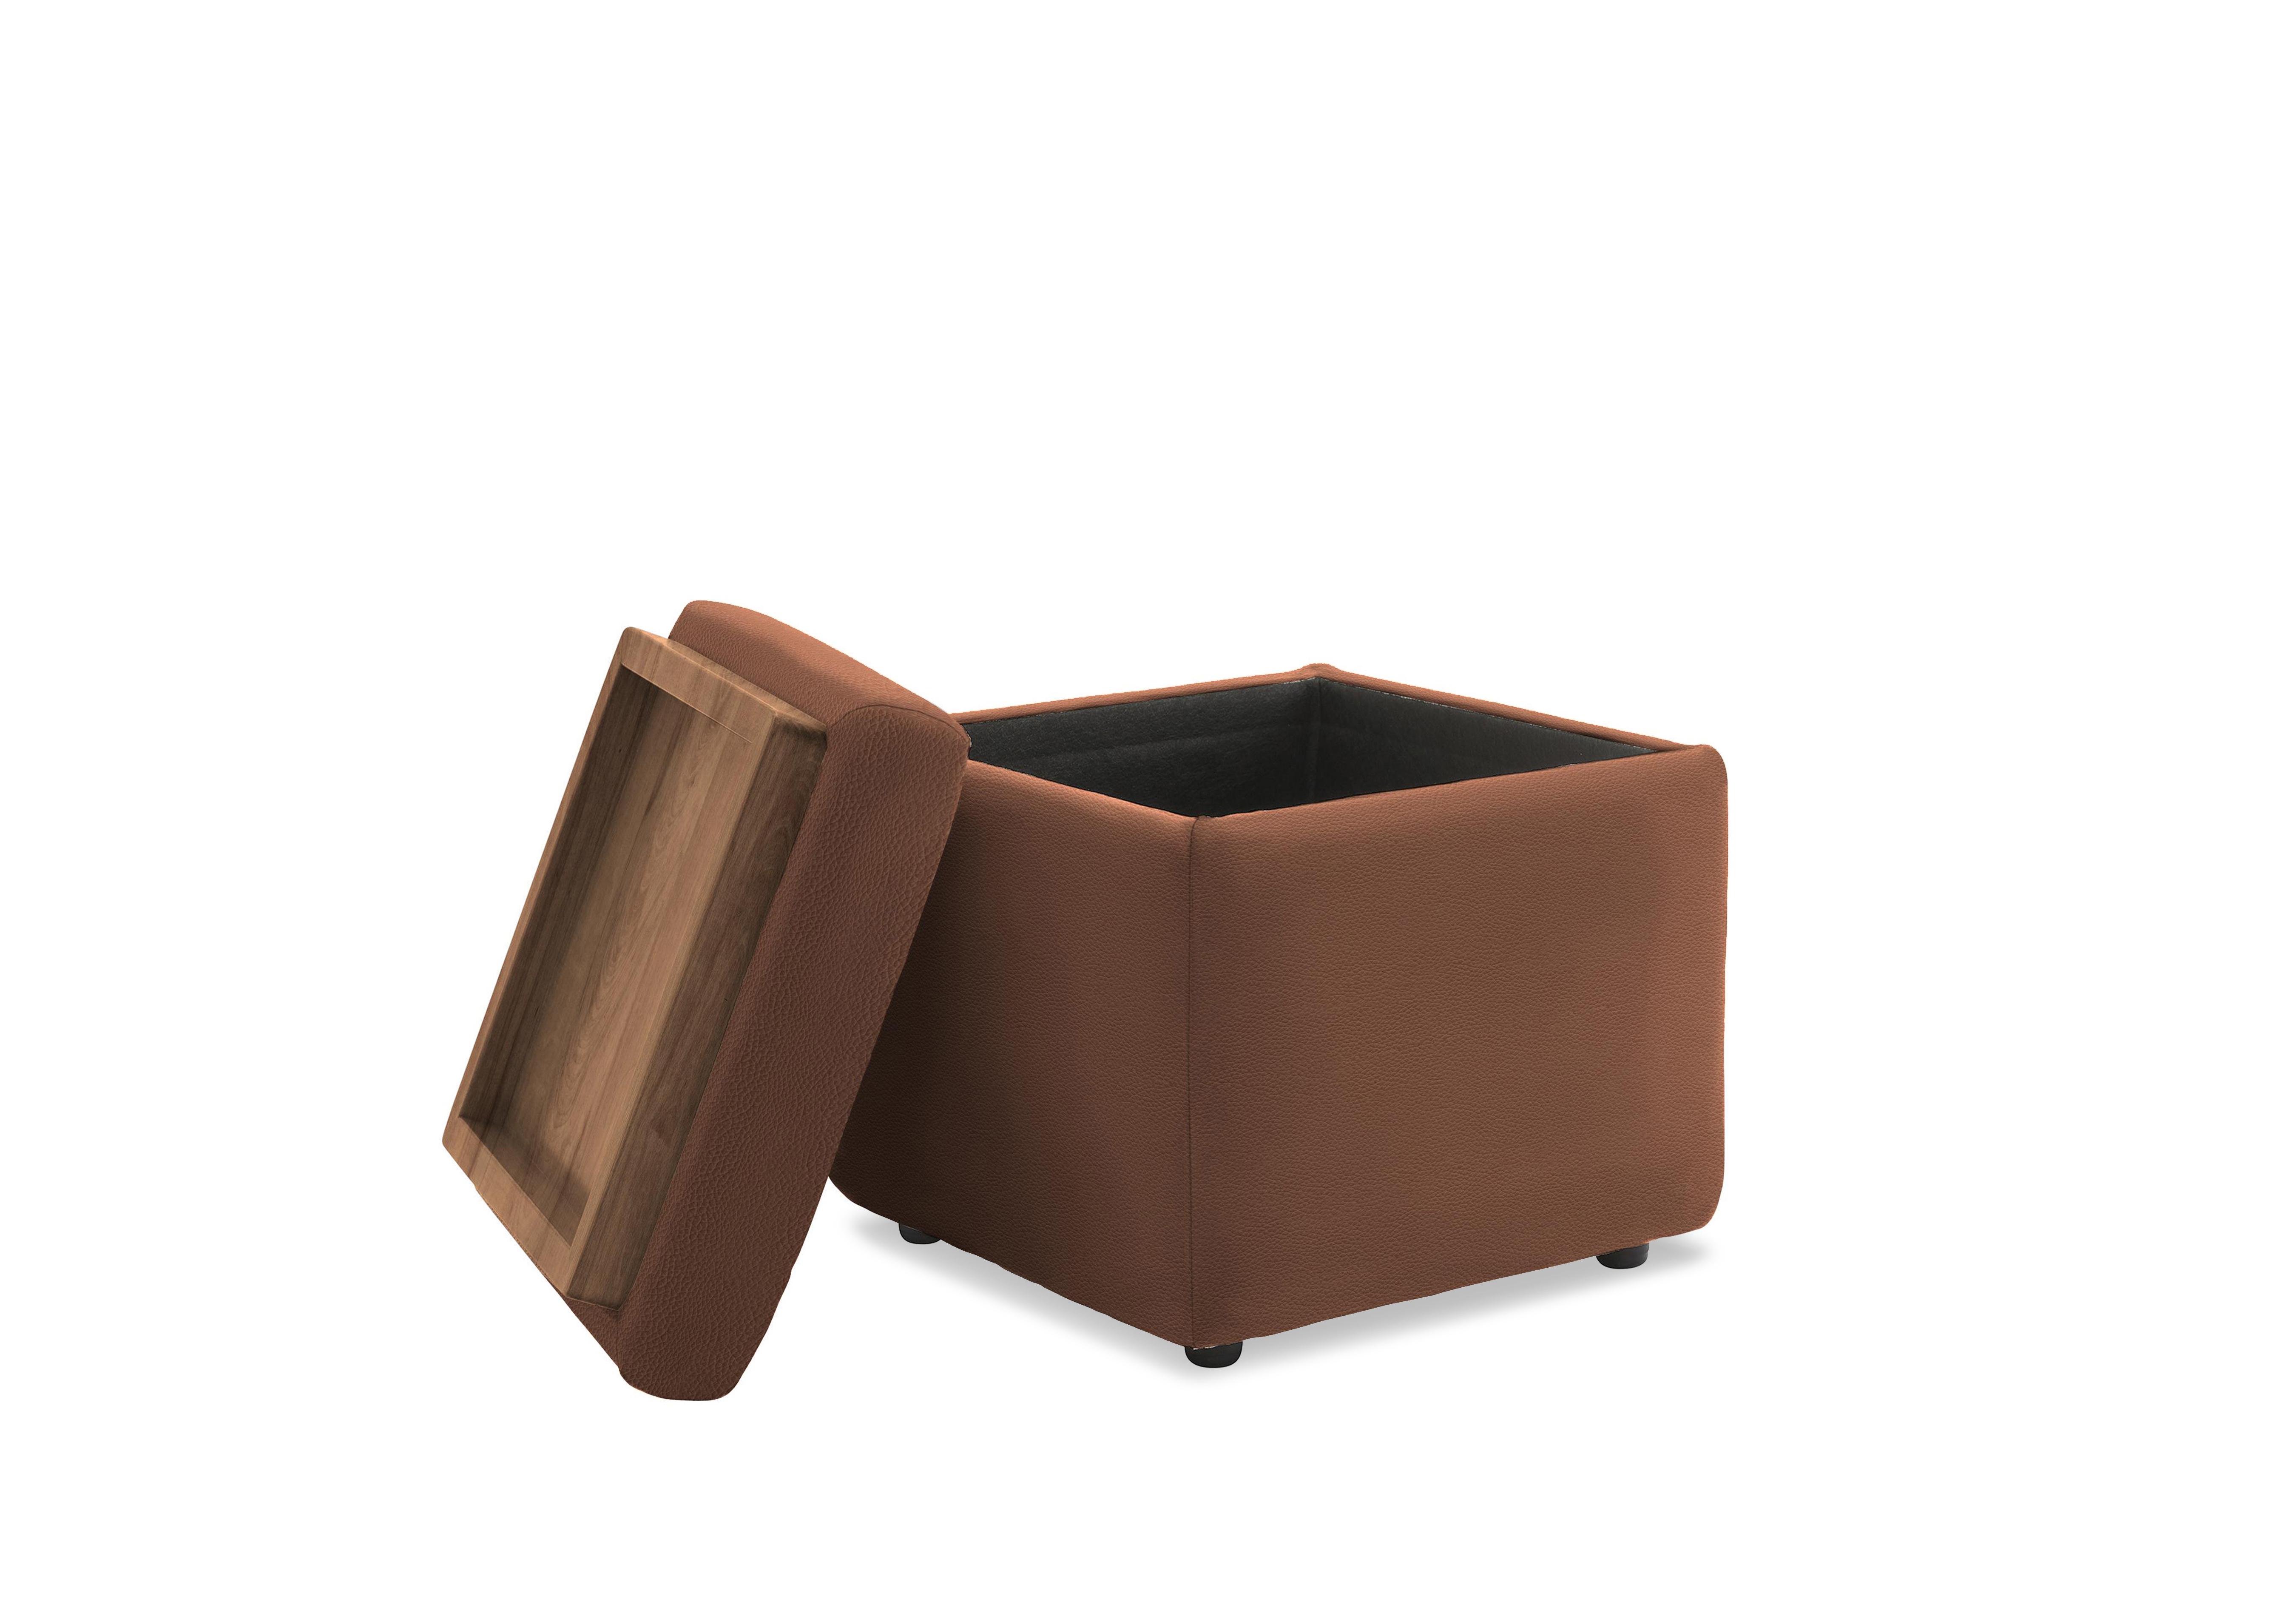 Arlo Leather Storage Cube Tray Stool in L848 Cambridge Conker Wal on Furniture Village